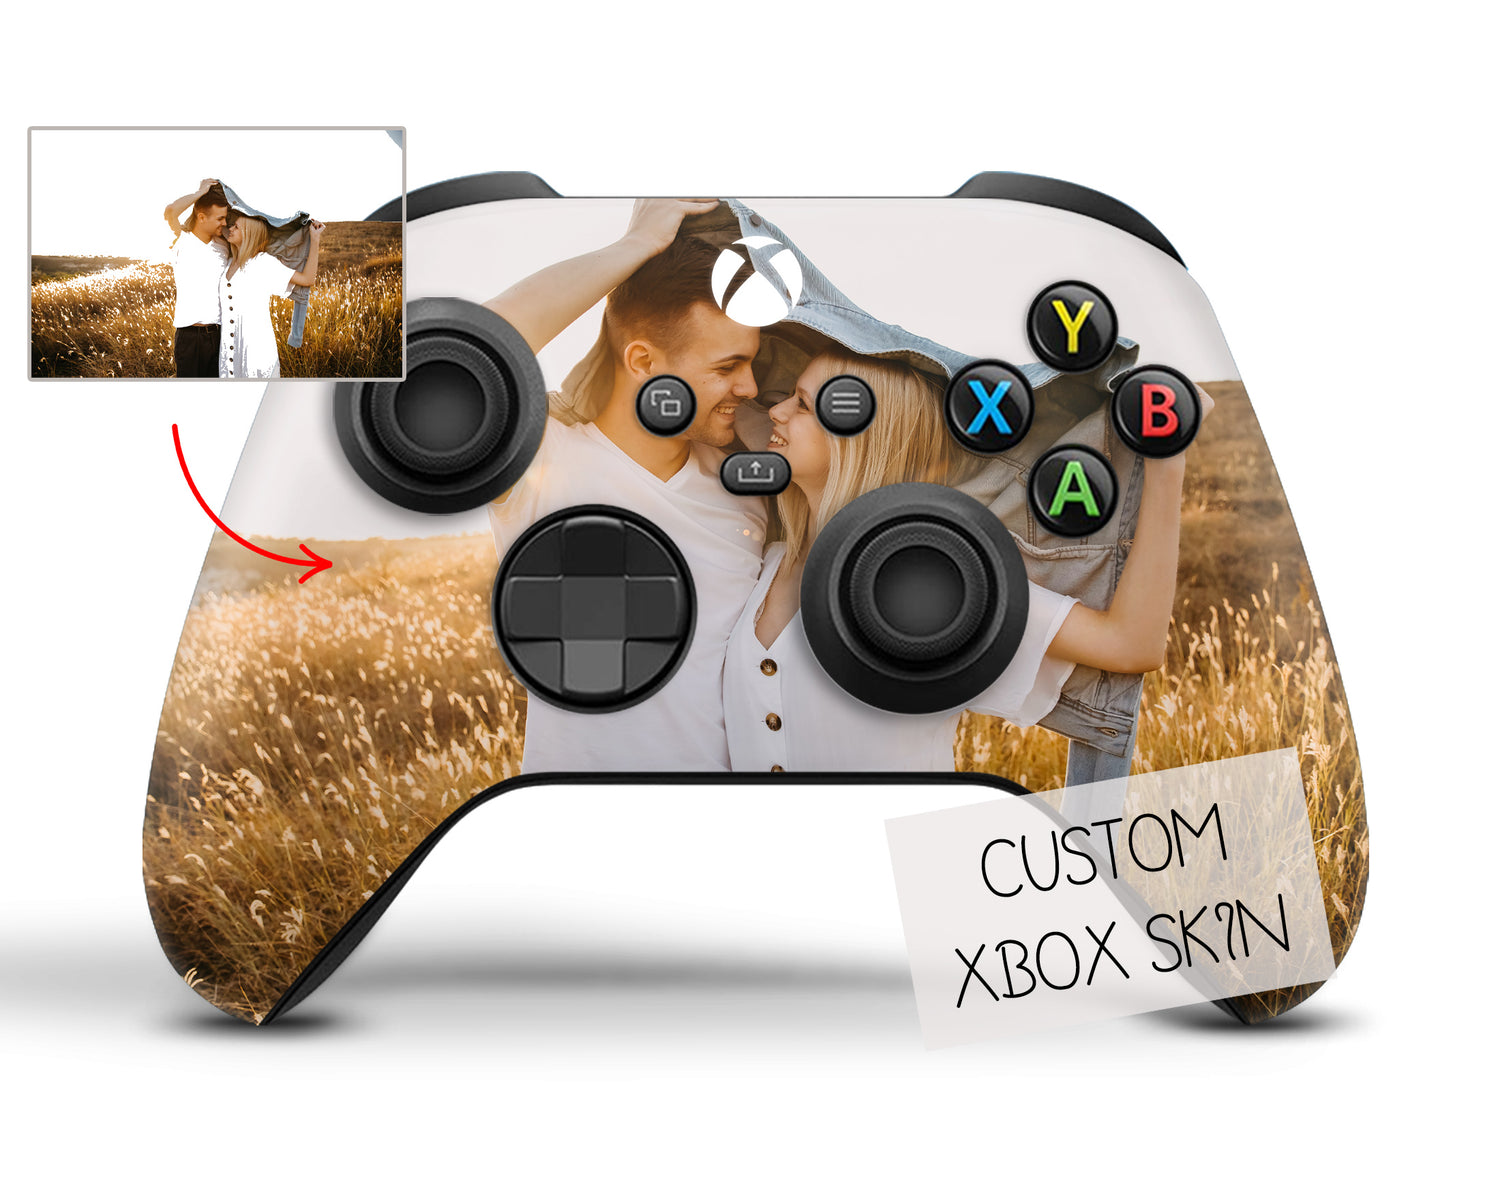 Halo Infinite Inspired Xbox Series X & S Skin – Lux Skins Official